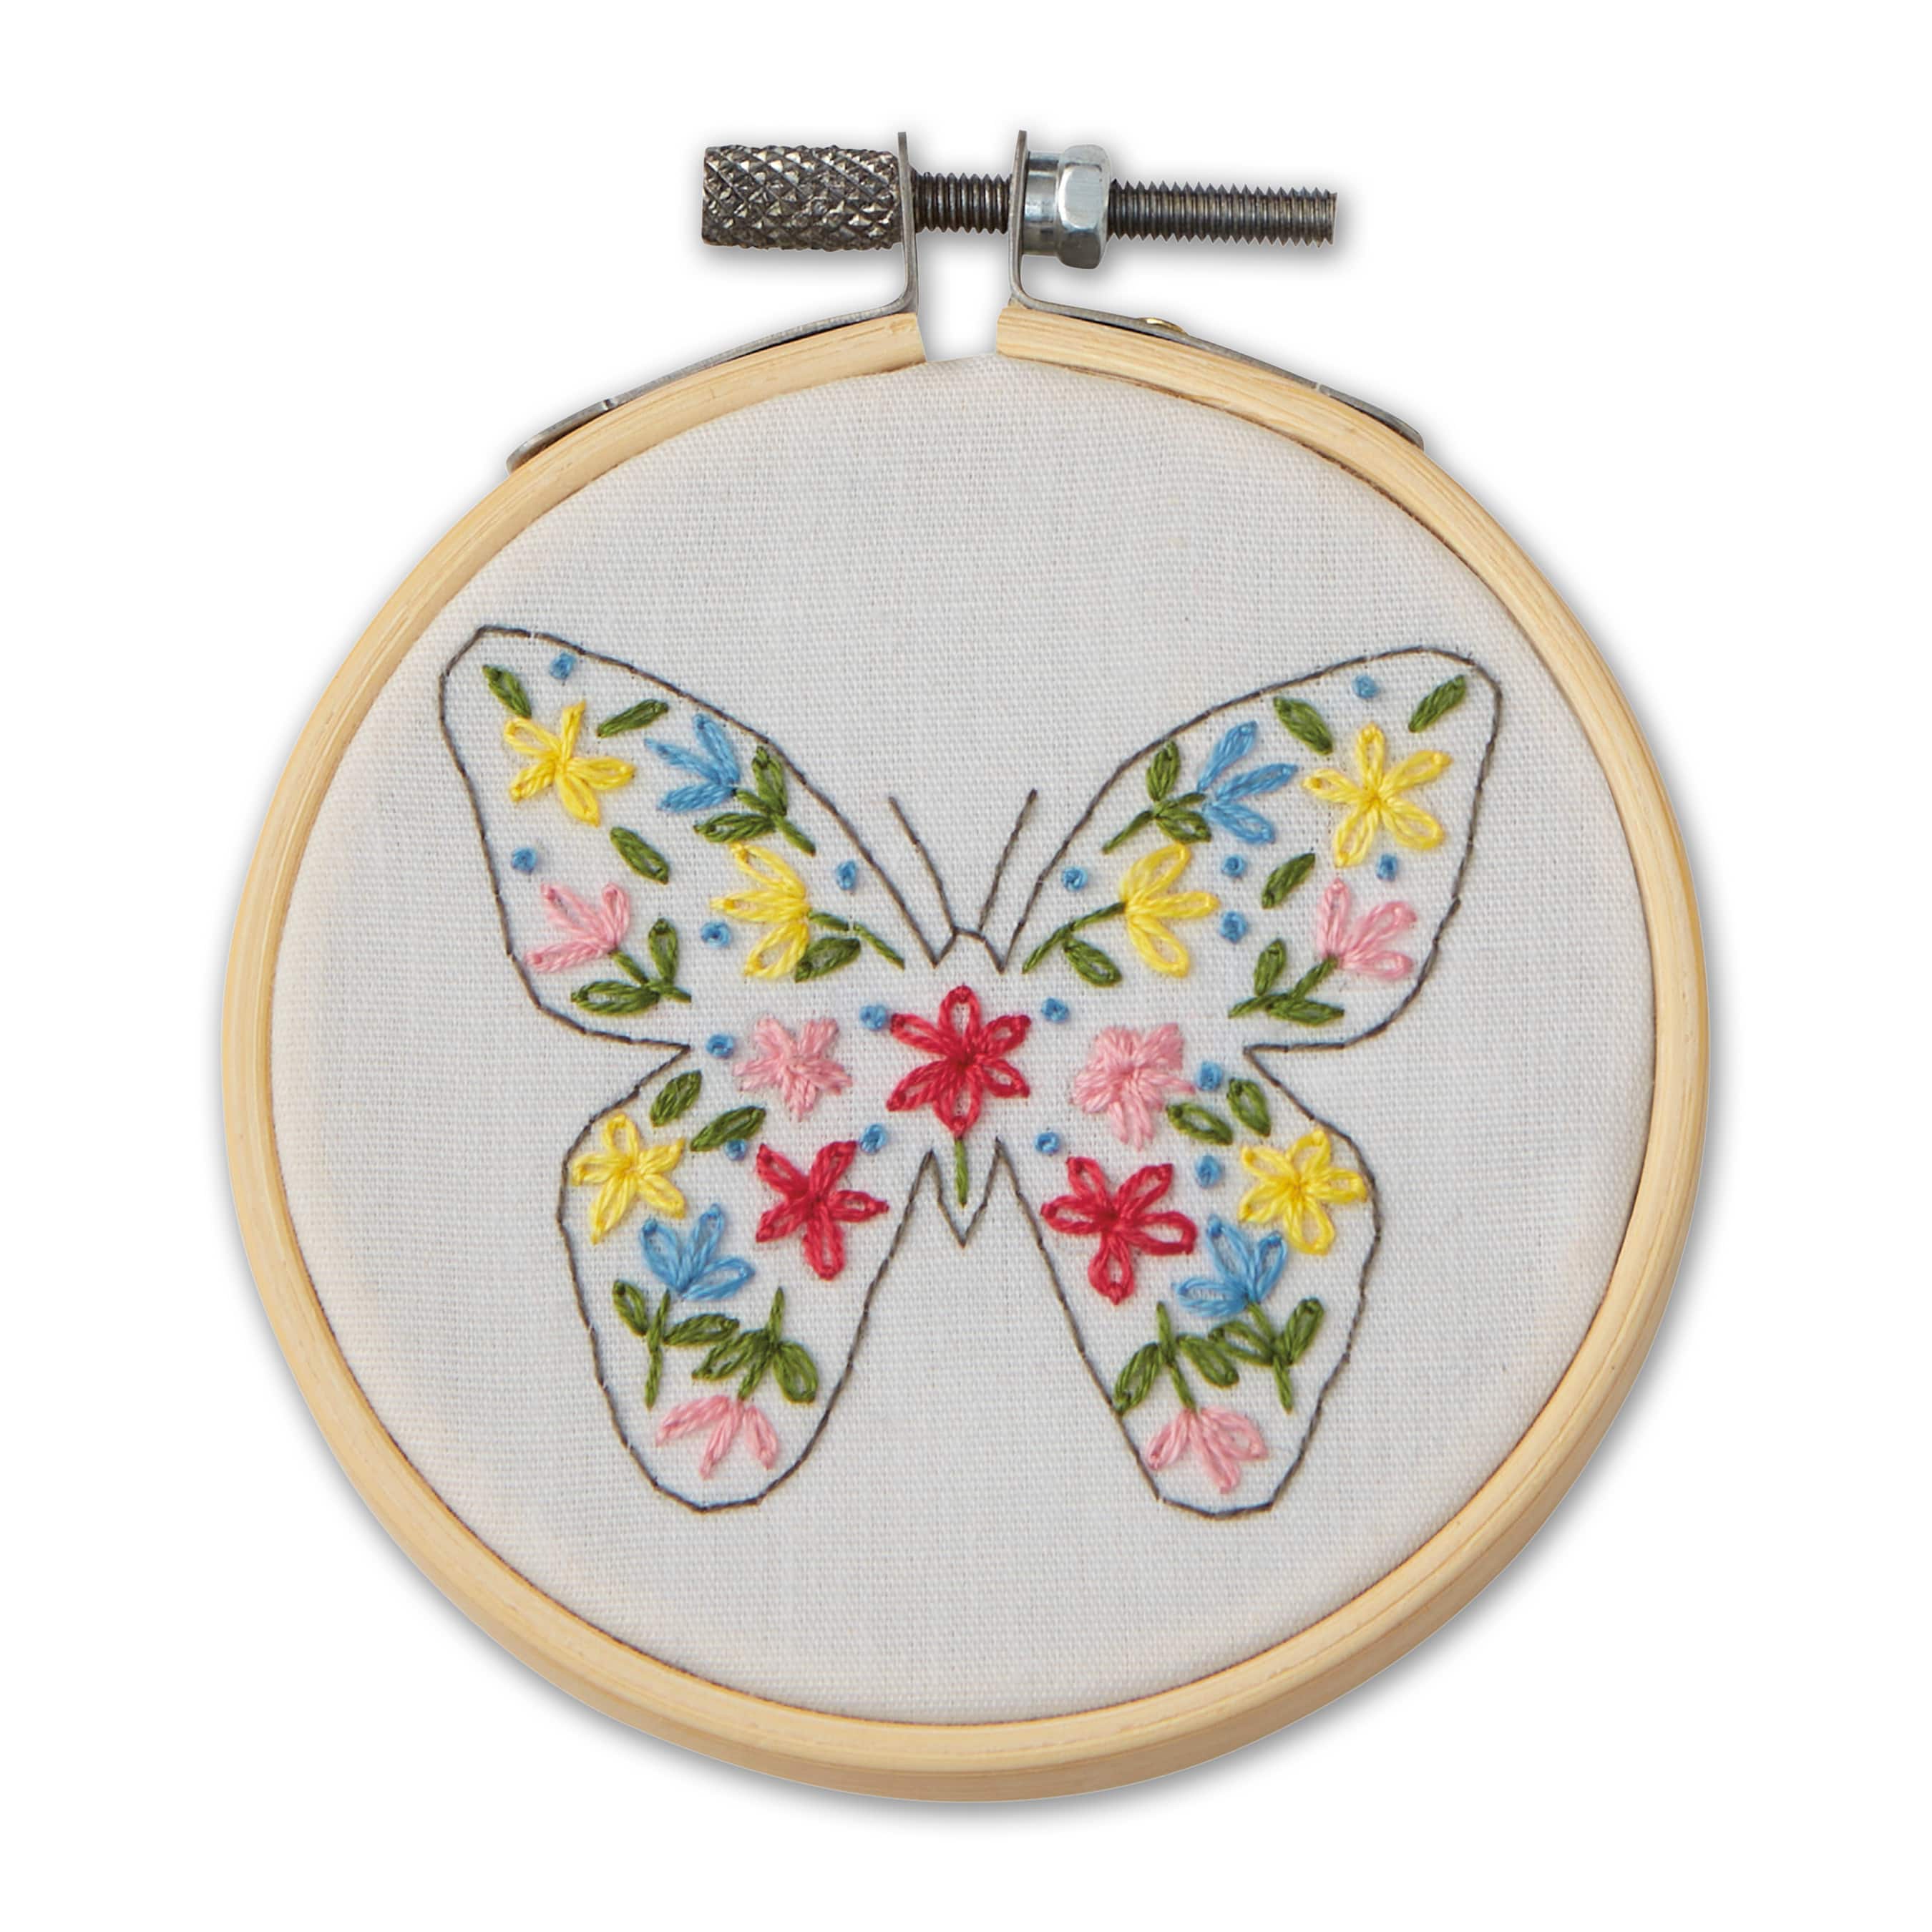 Embroidery set fot cross stitching Stock Photo by ©IMelnyk 430747360